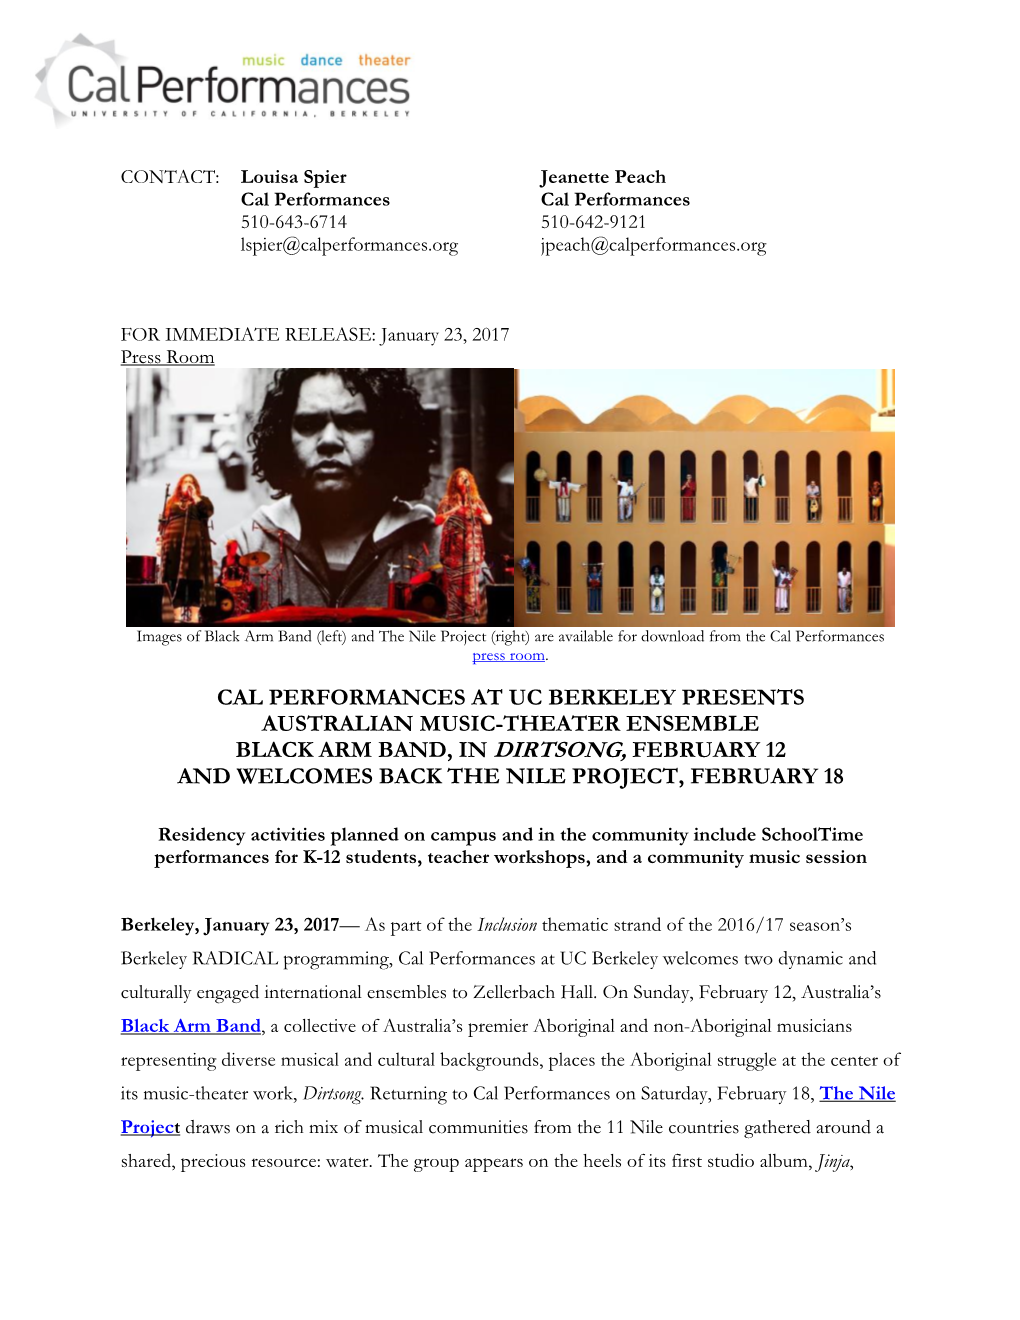 Cal Performances at Uc Berkeley Presents Australian Music-Theater Ensemble Black Arm Band, in Dirtsong, February 12 and Welcomes Back the Nile Project, February 18